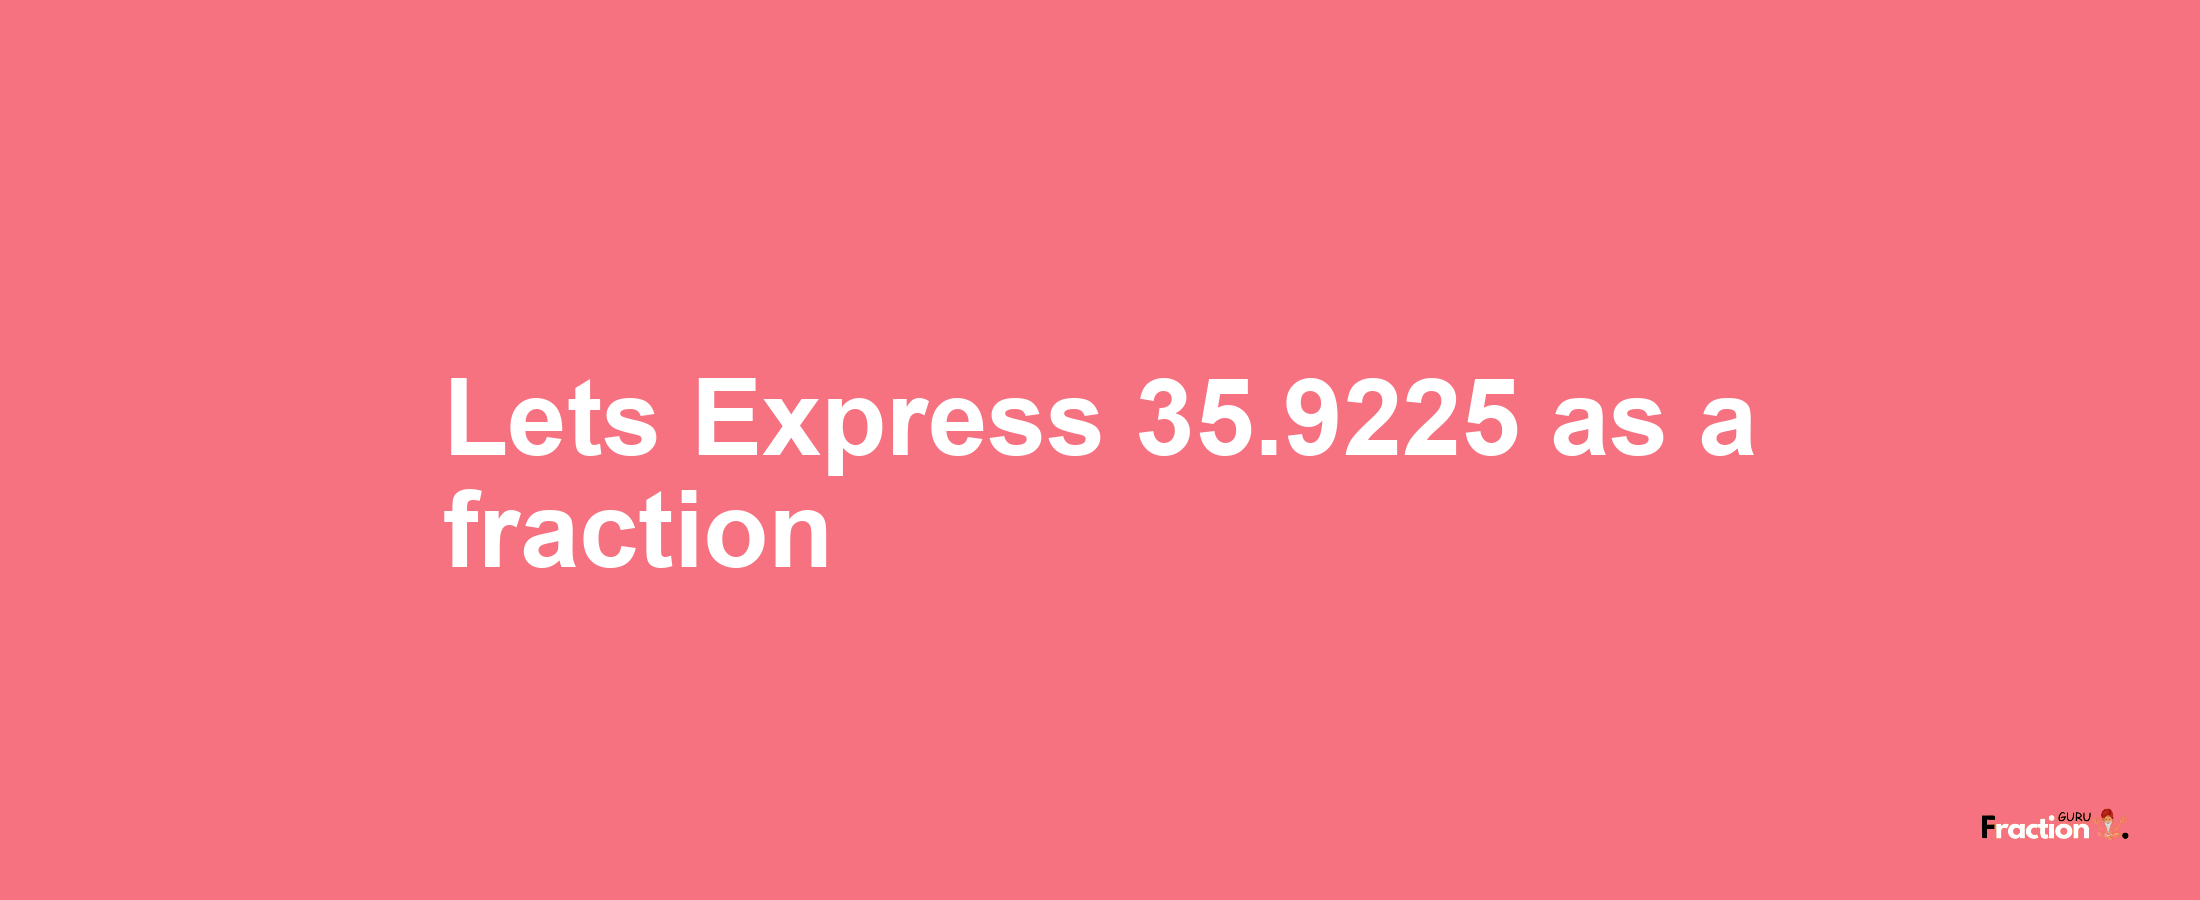 Lets Express 35.9225 as afraction